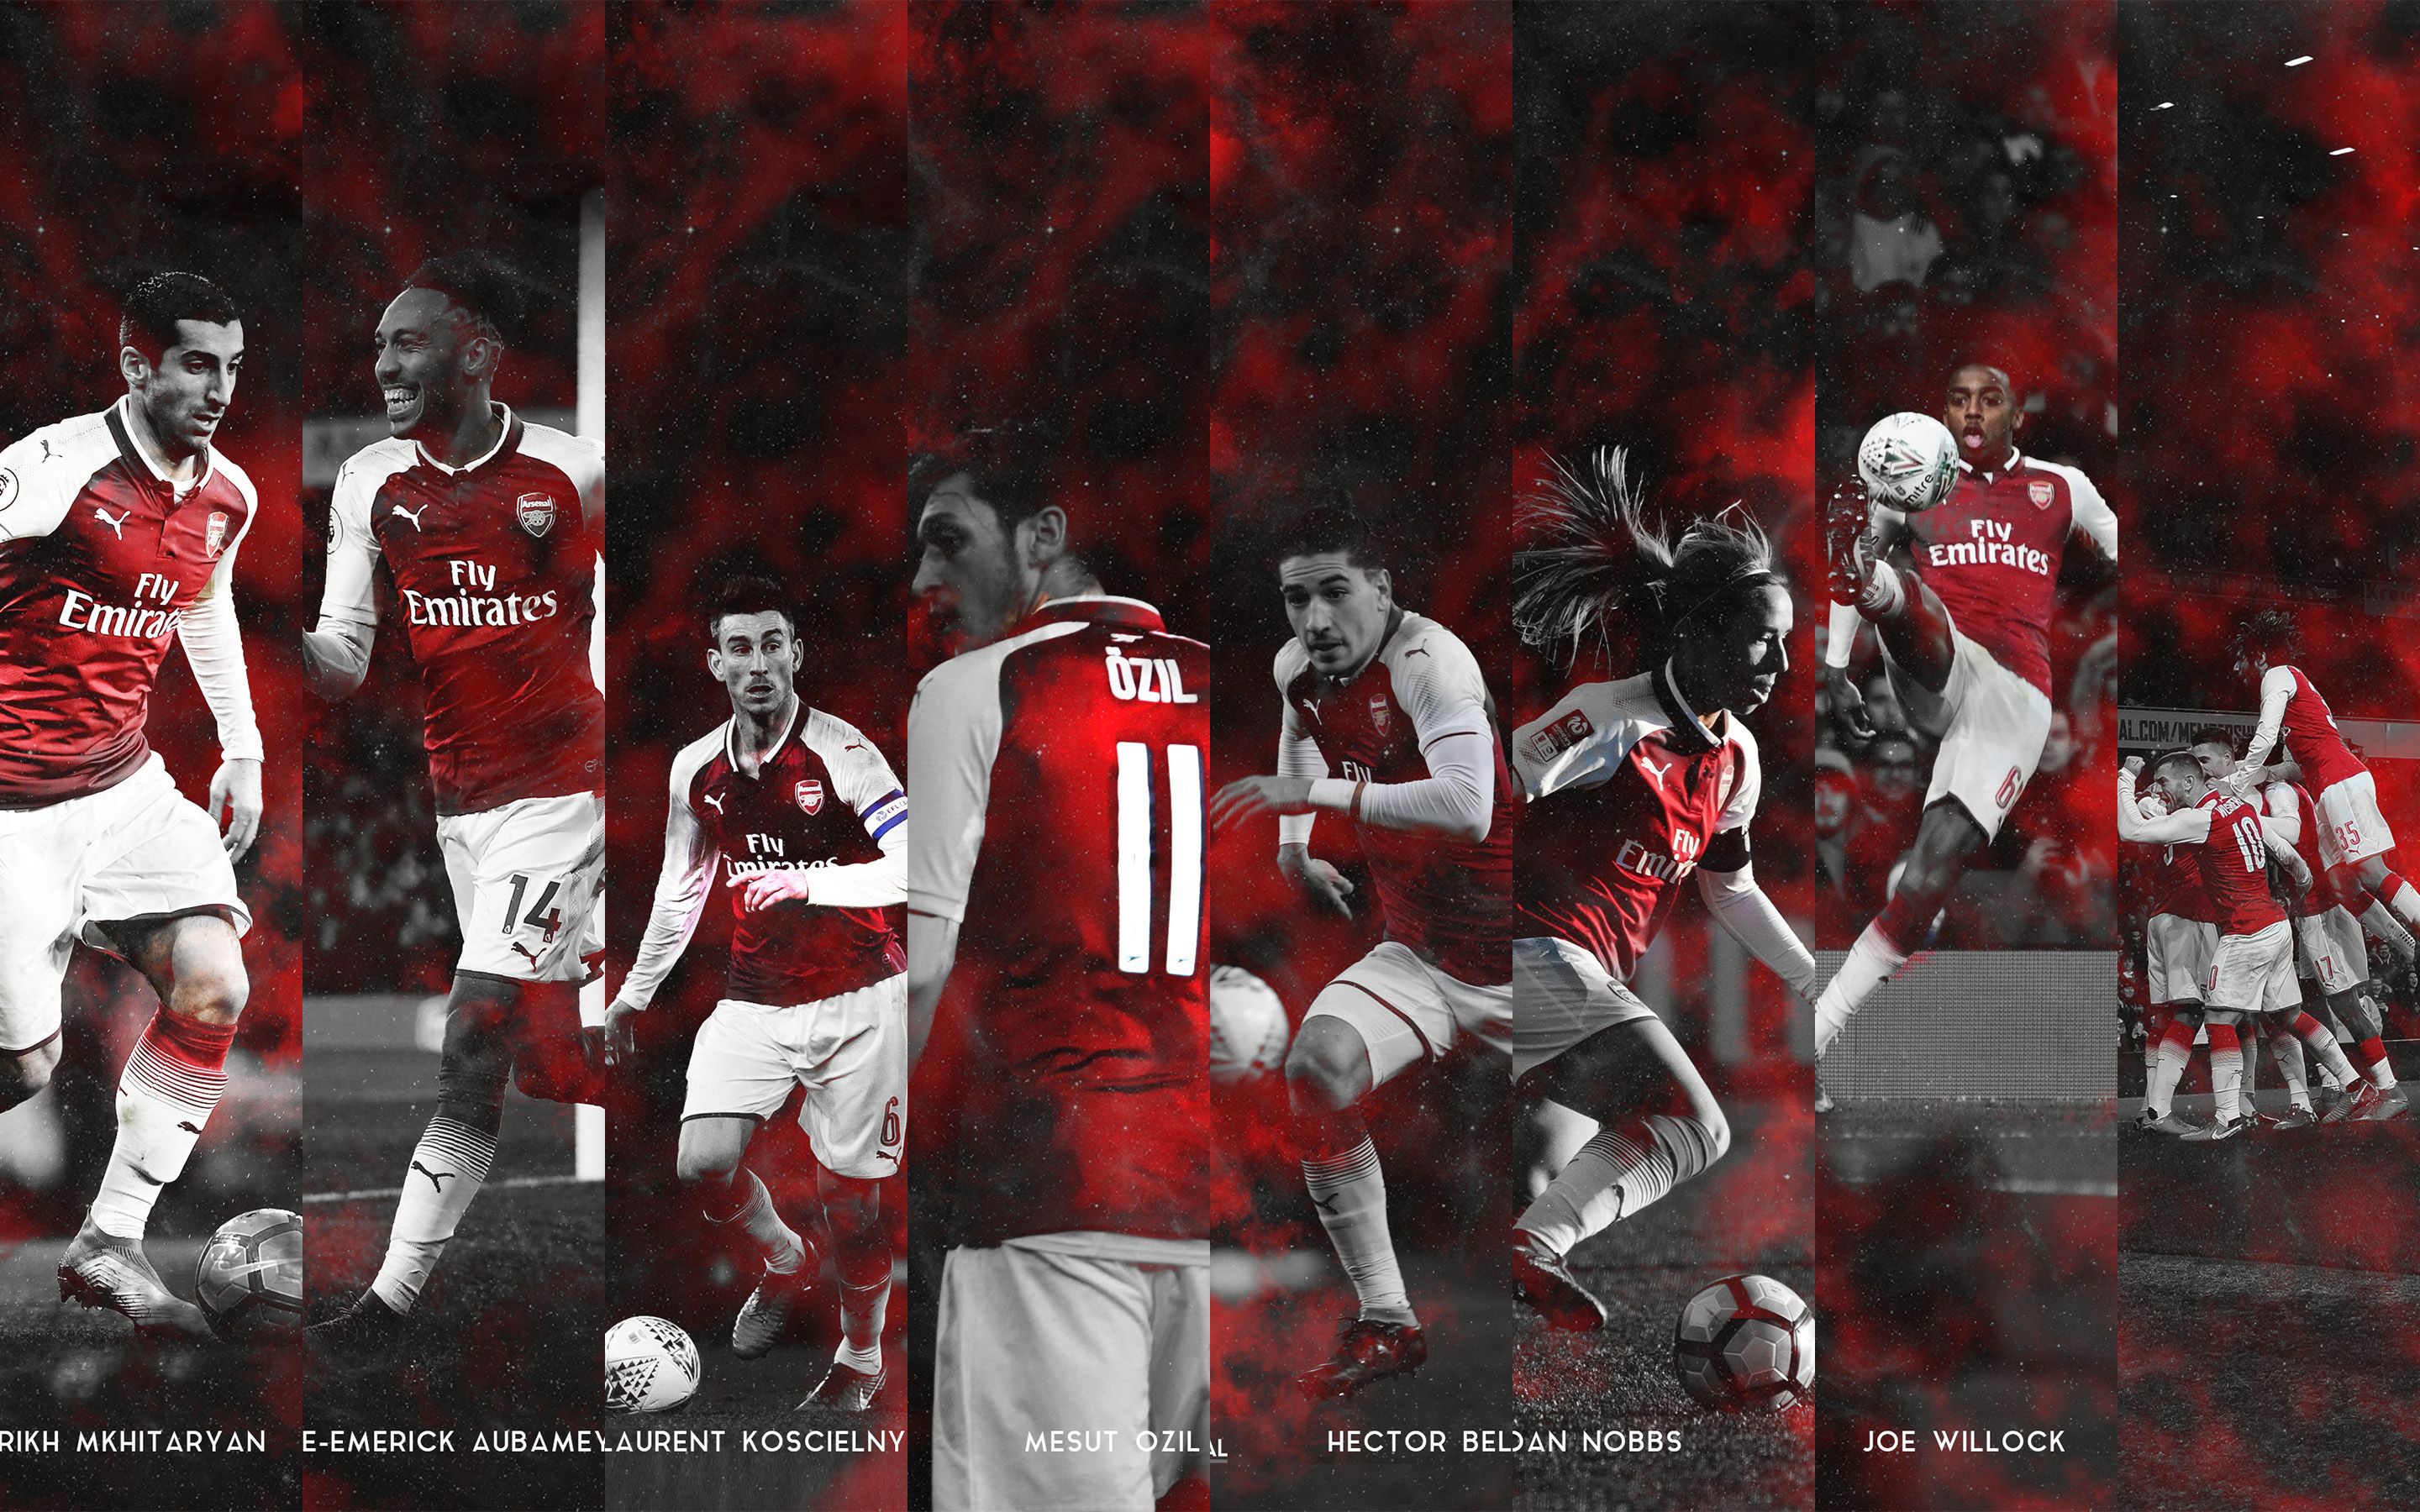 Amazing Arsenal phone wallpaper collaboration with Humans Of The Arsenal + new signings bonus